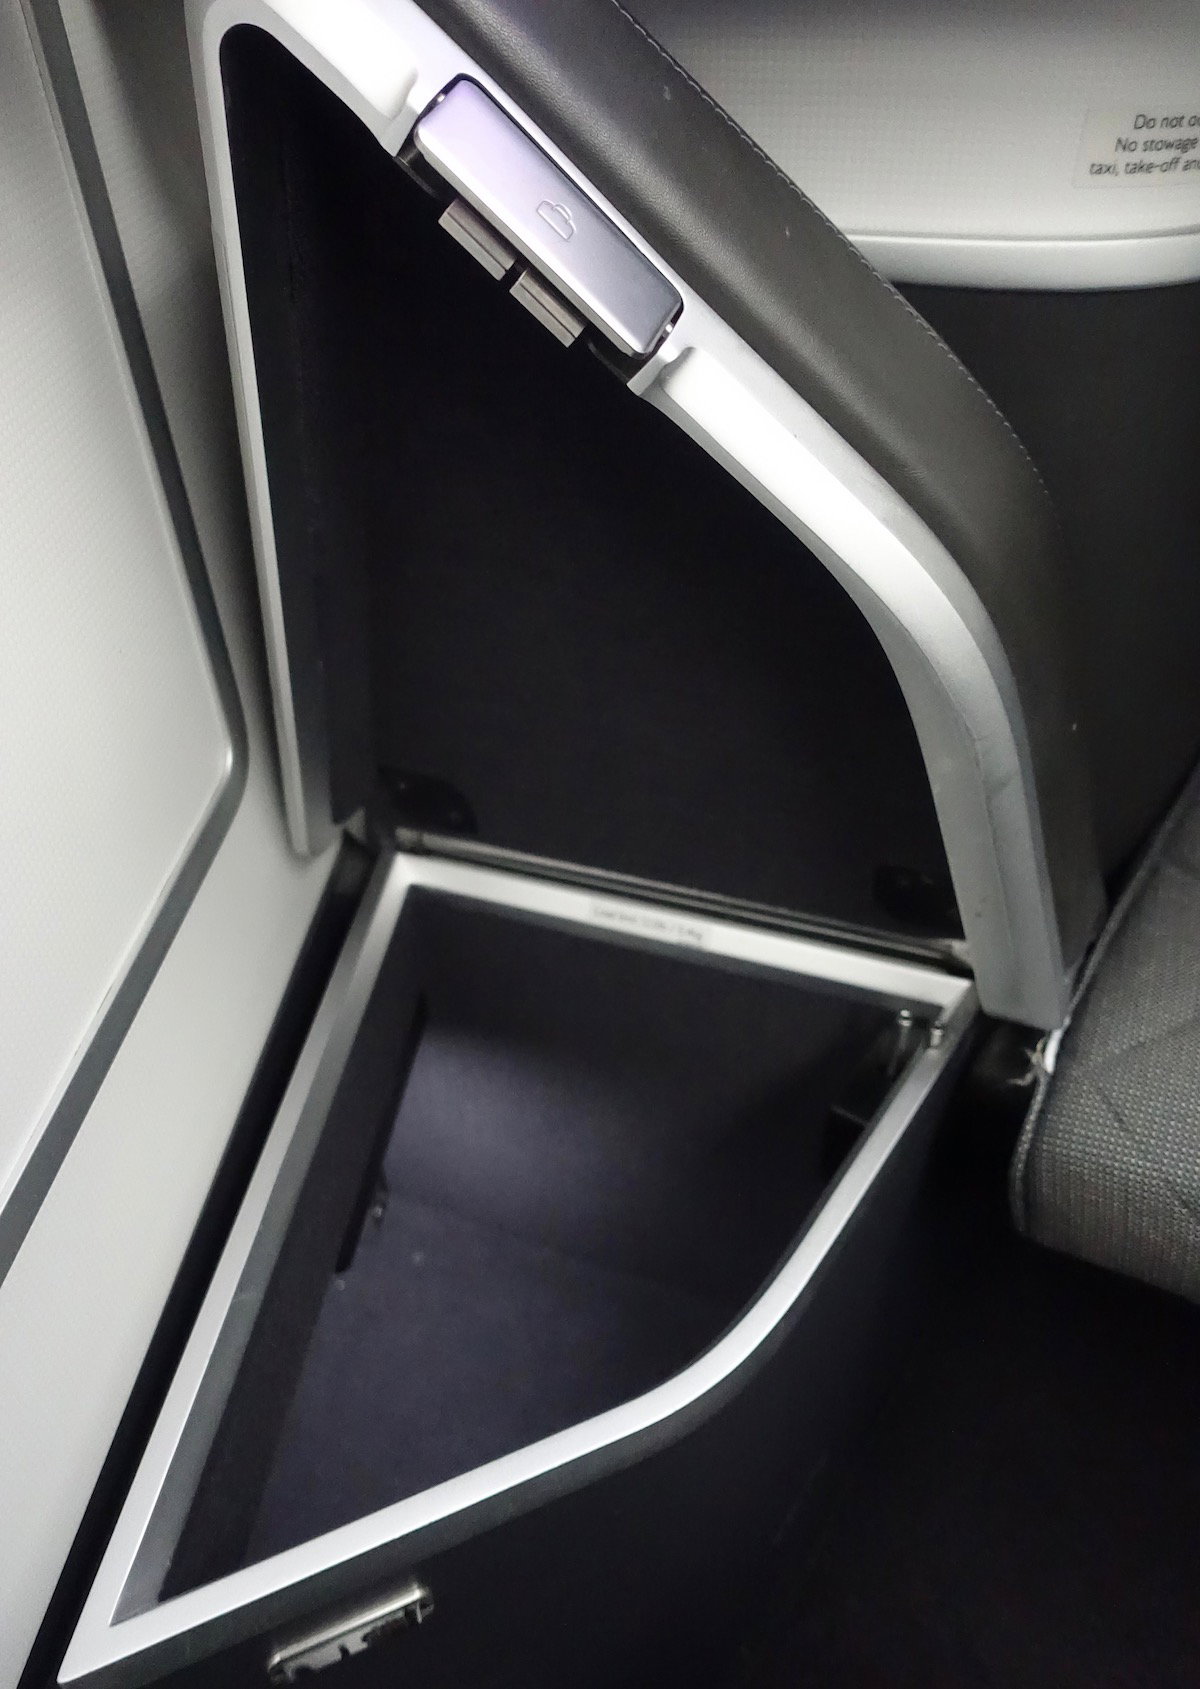 British Airways 787 First Class Review I One Mile At A Time